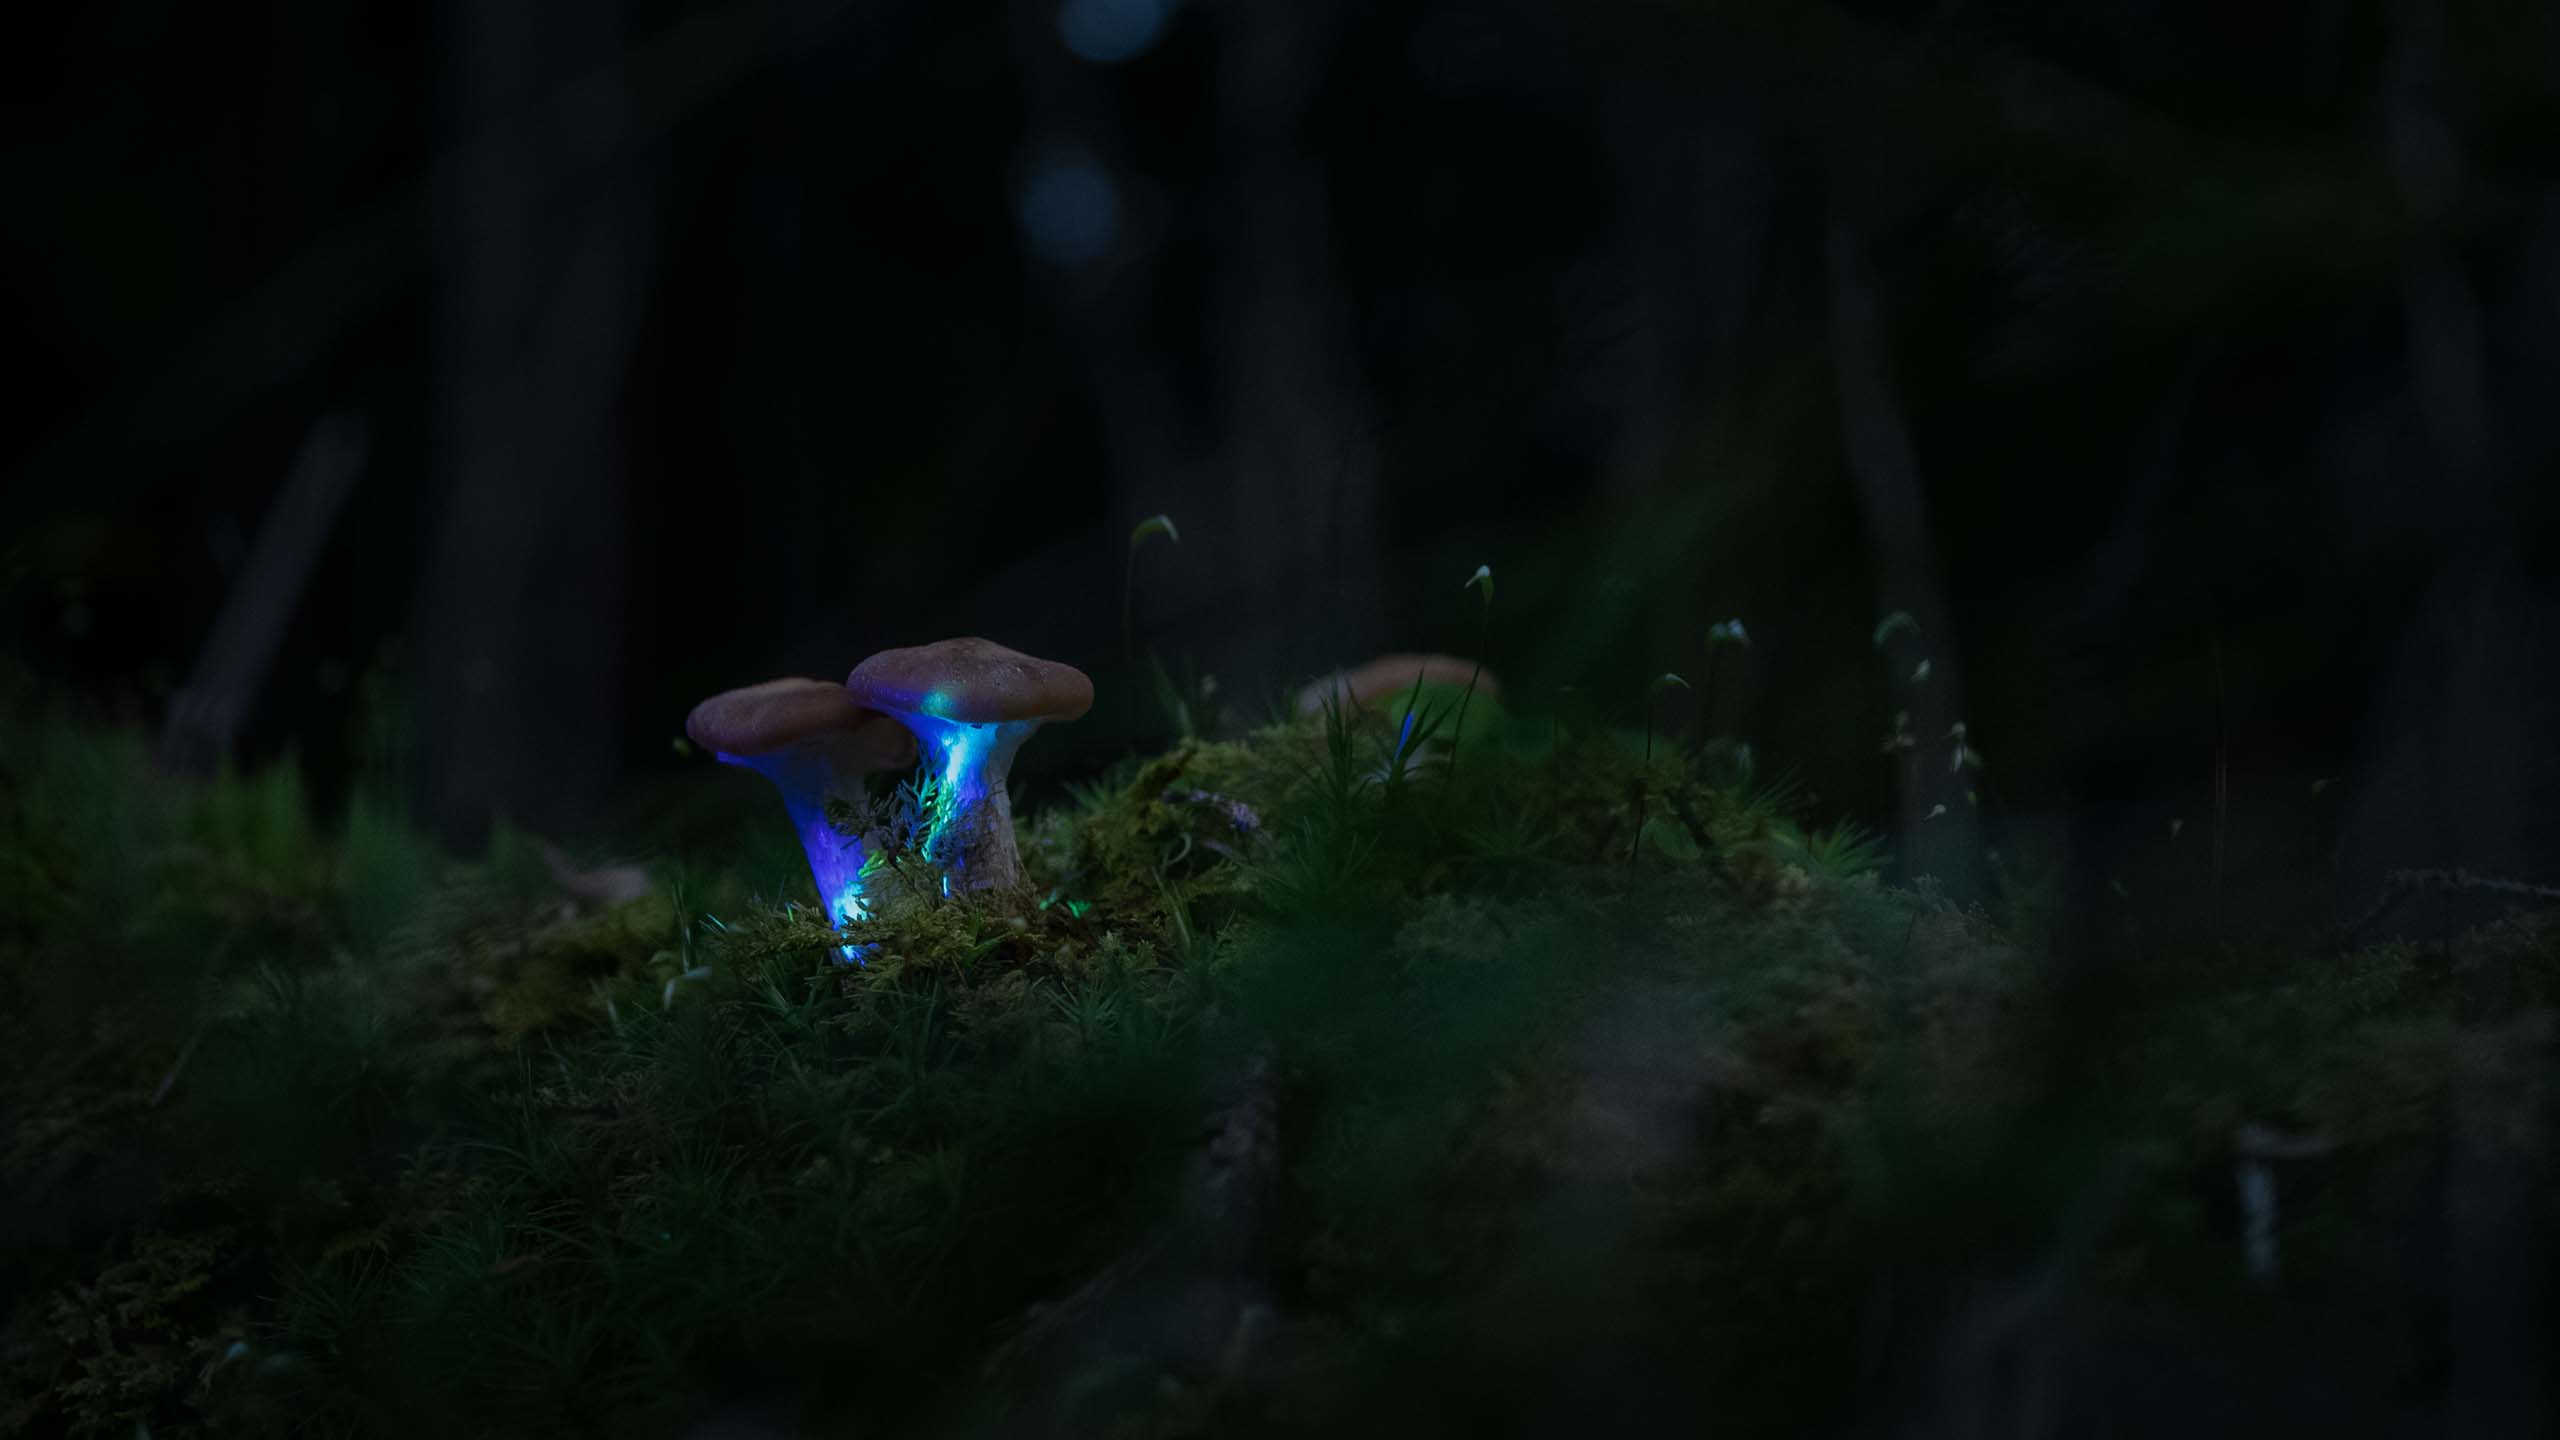 Video projection on two mushrooms with blue visuals  in a forest